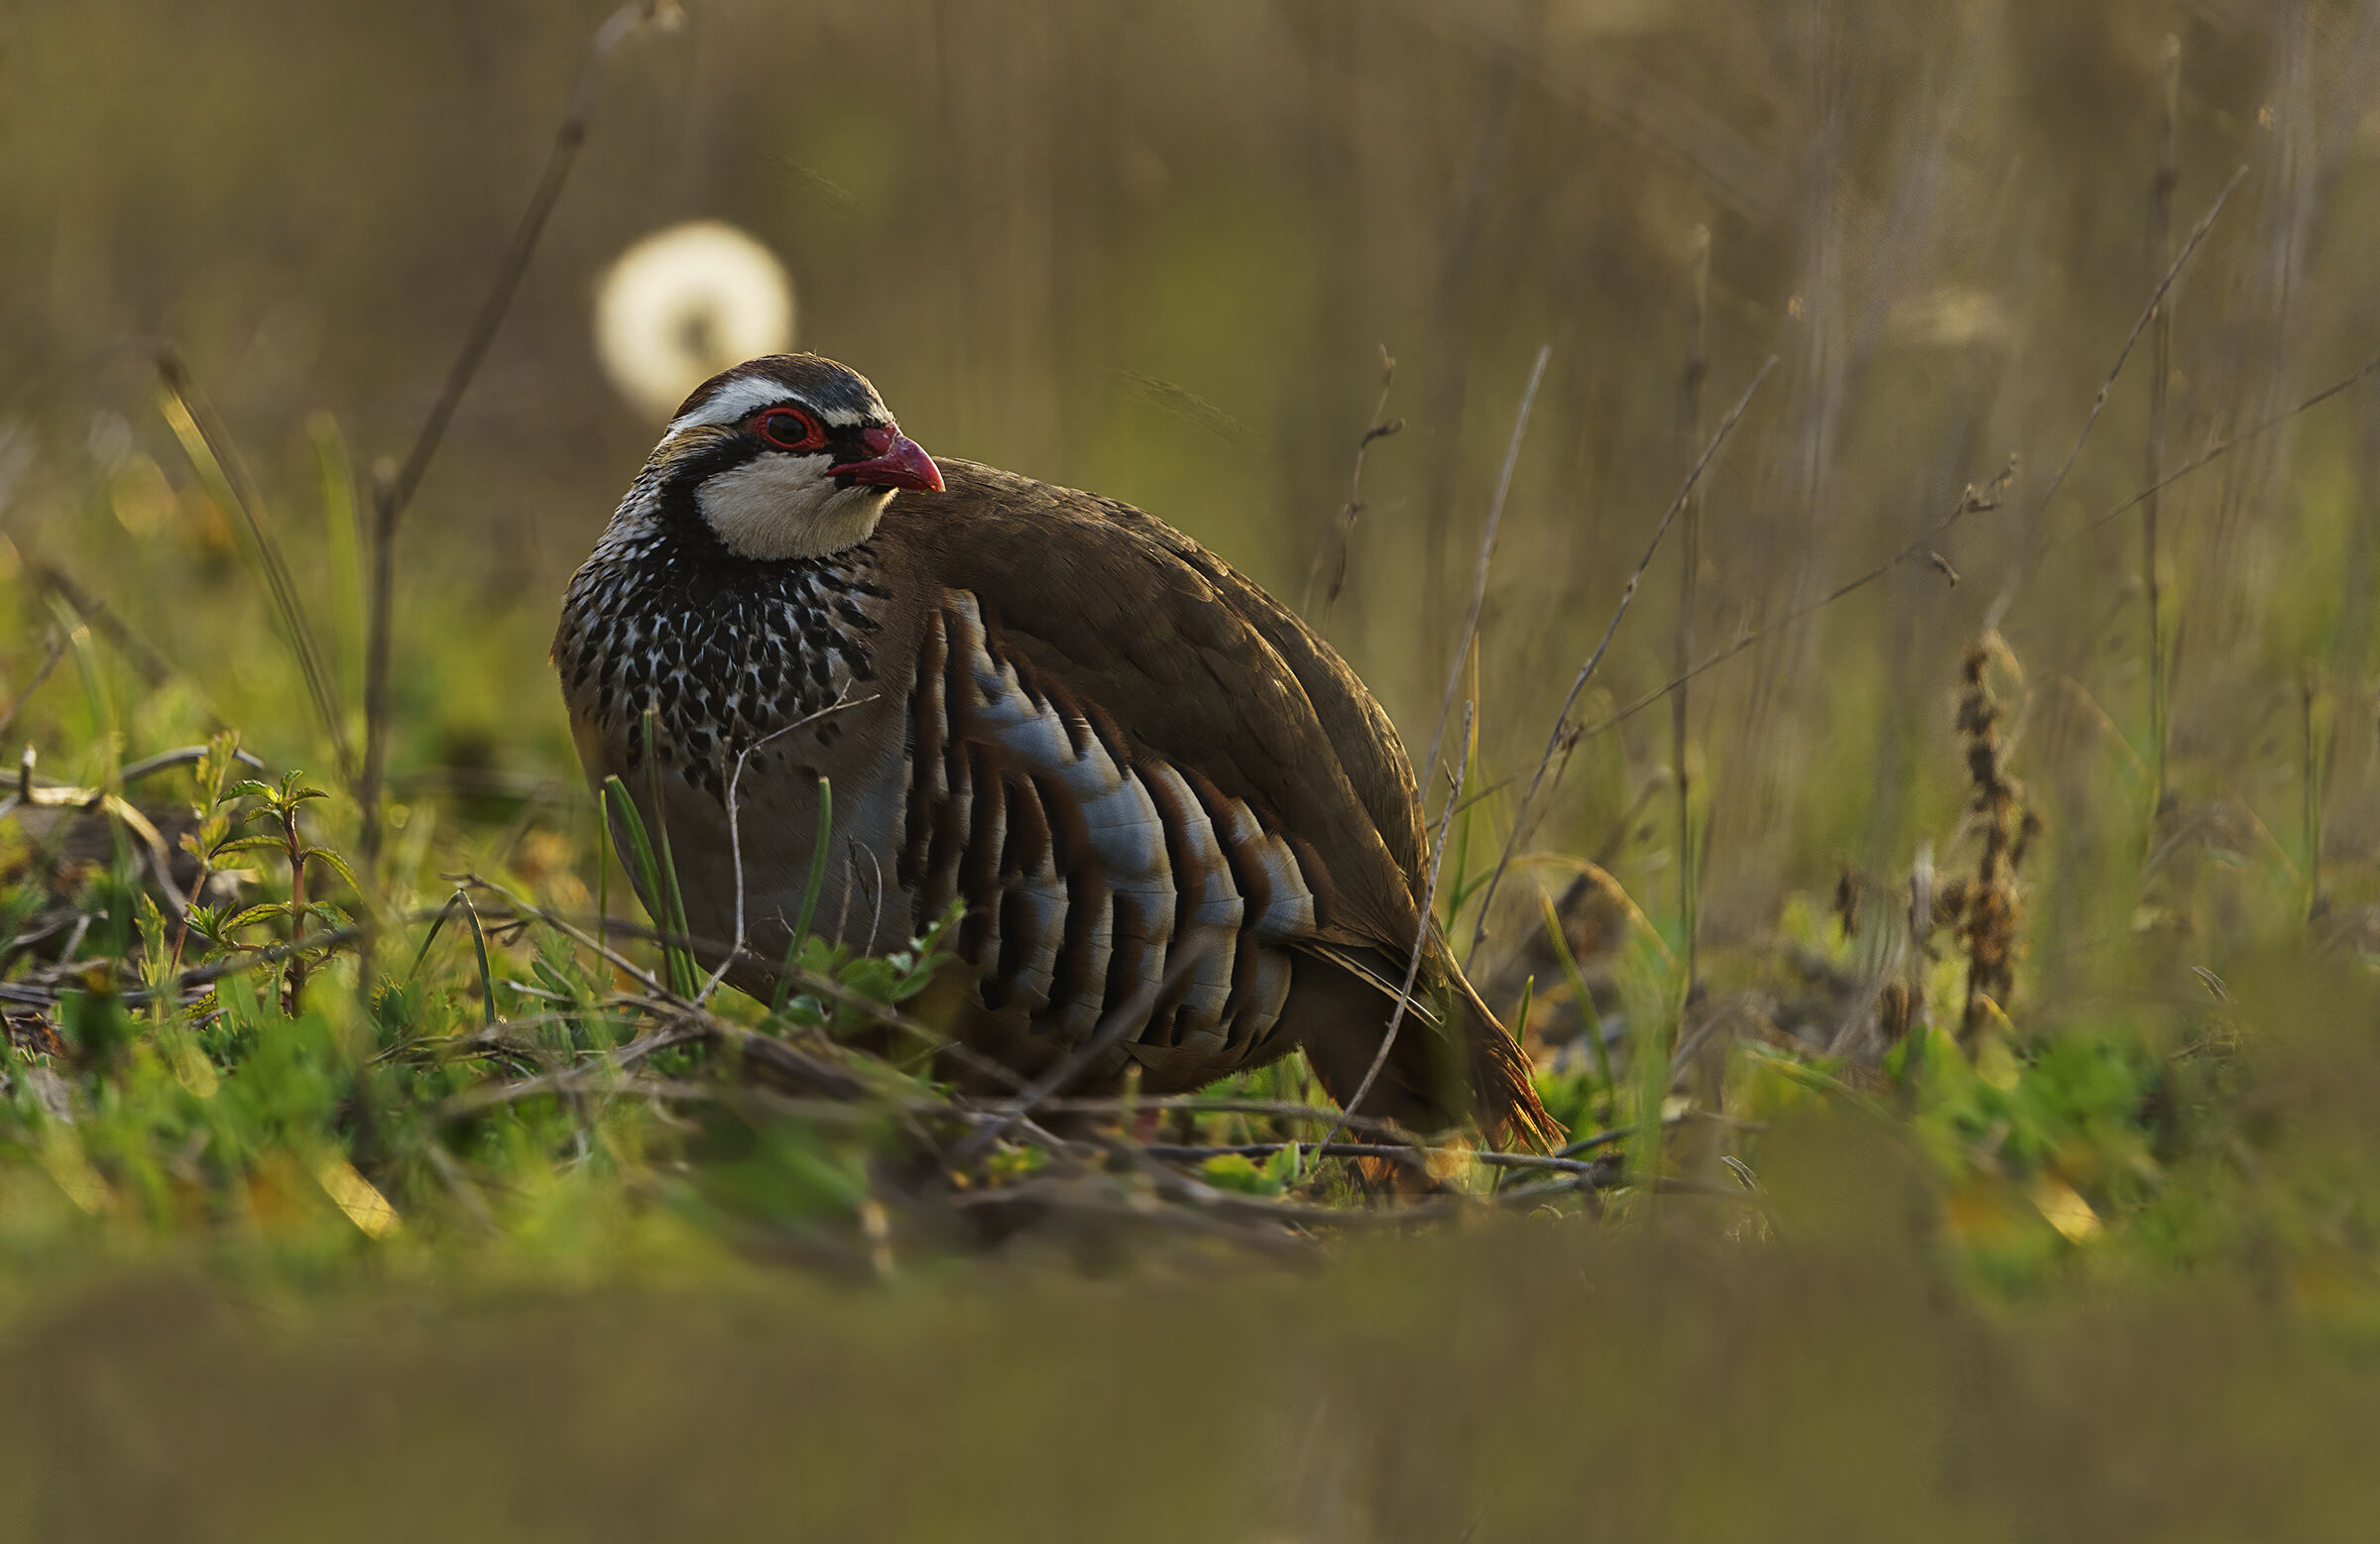 Red and Dandelion partridge...